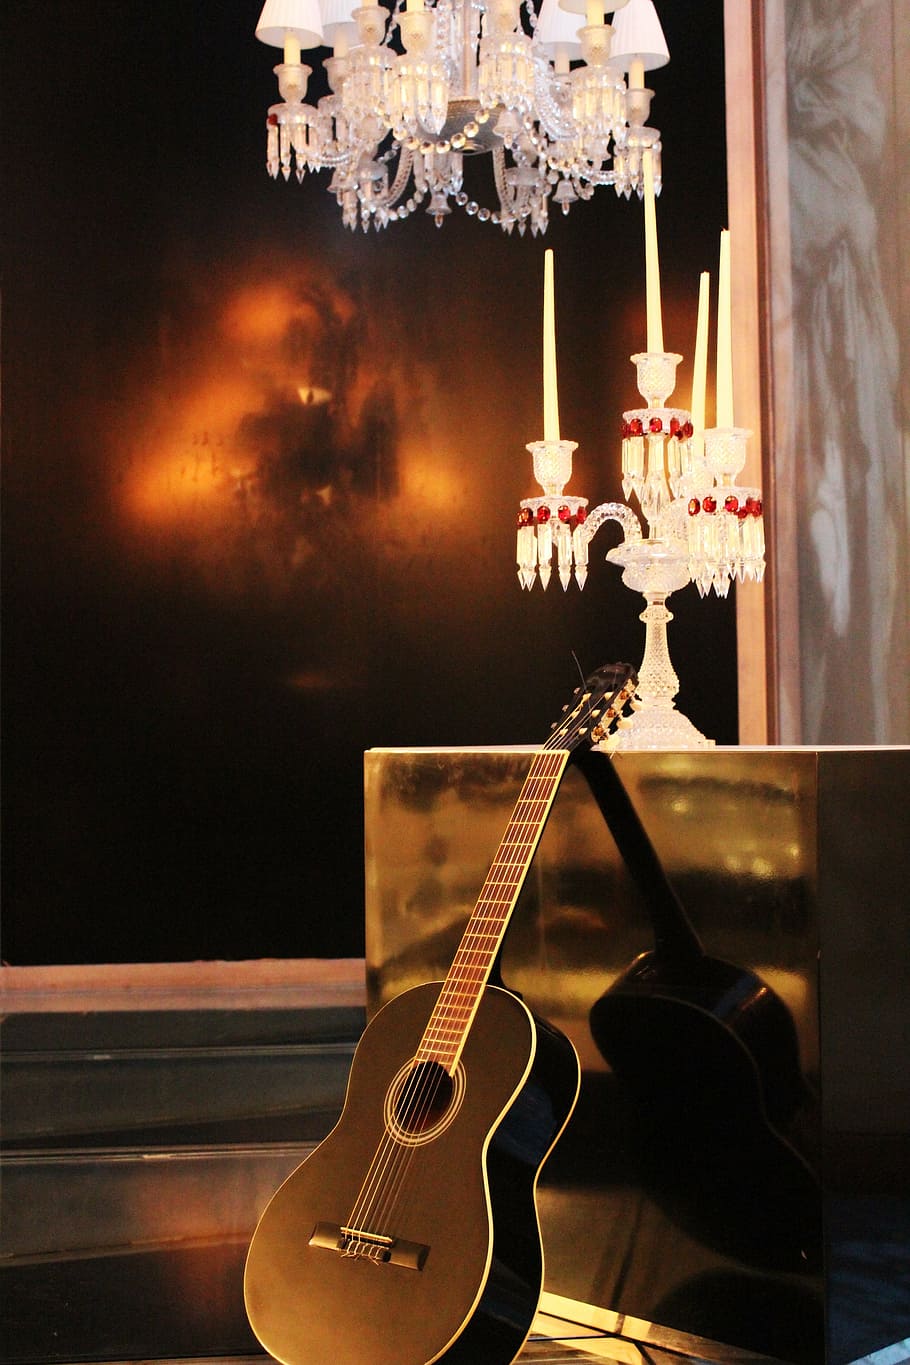 music, guitar, candle holder, art, musical instrument, string instrument, illuminated, lighting equipment, musical equipment, arts culture and entertainment